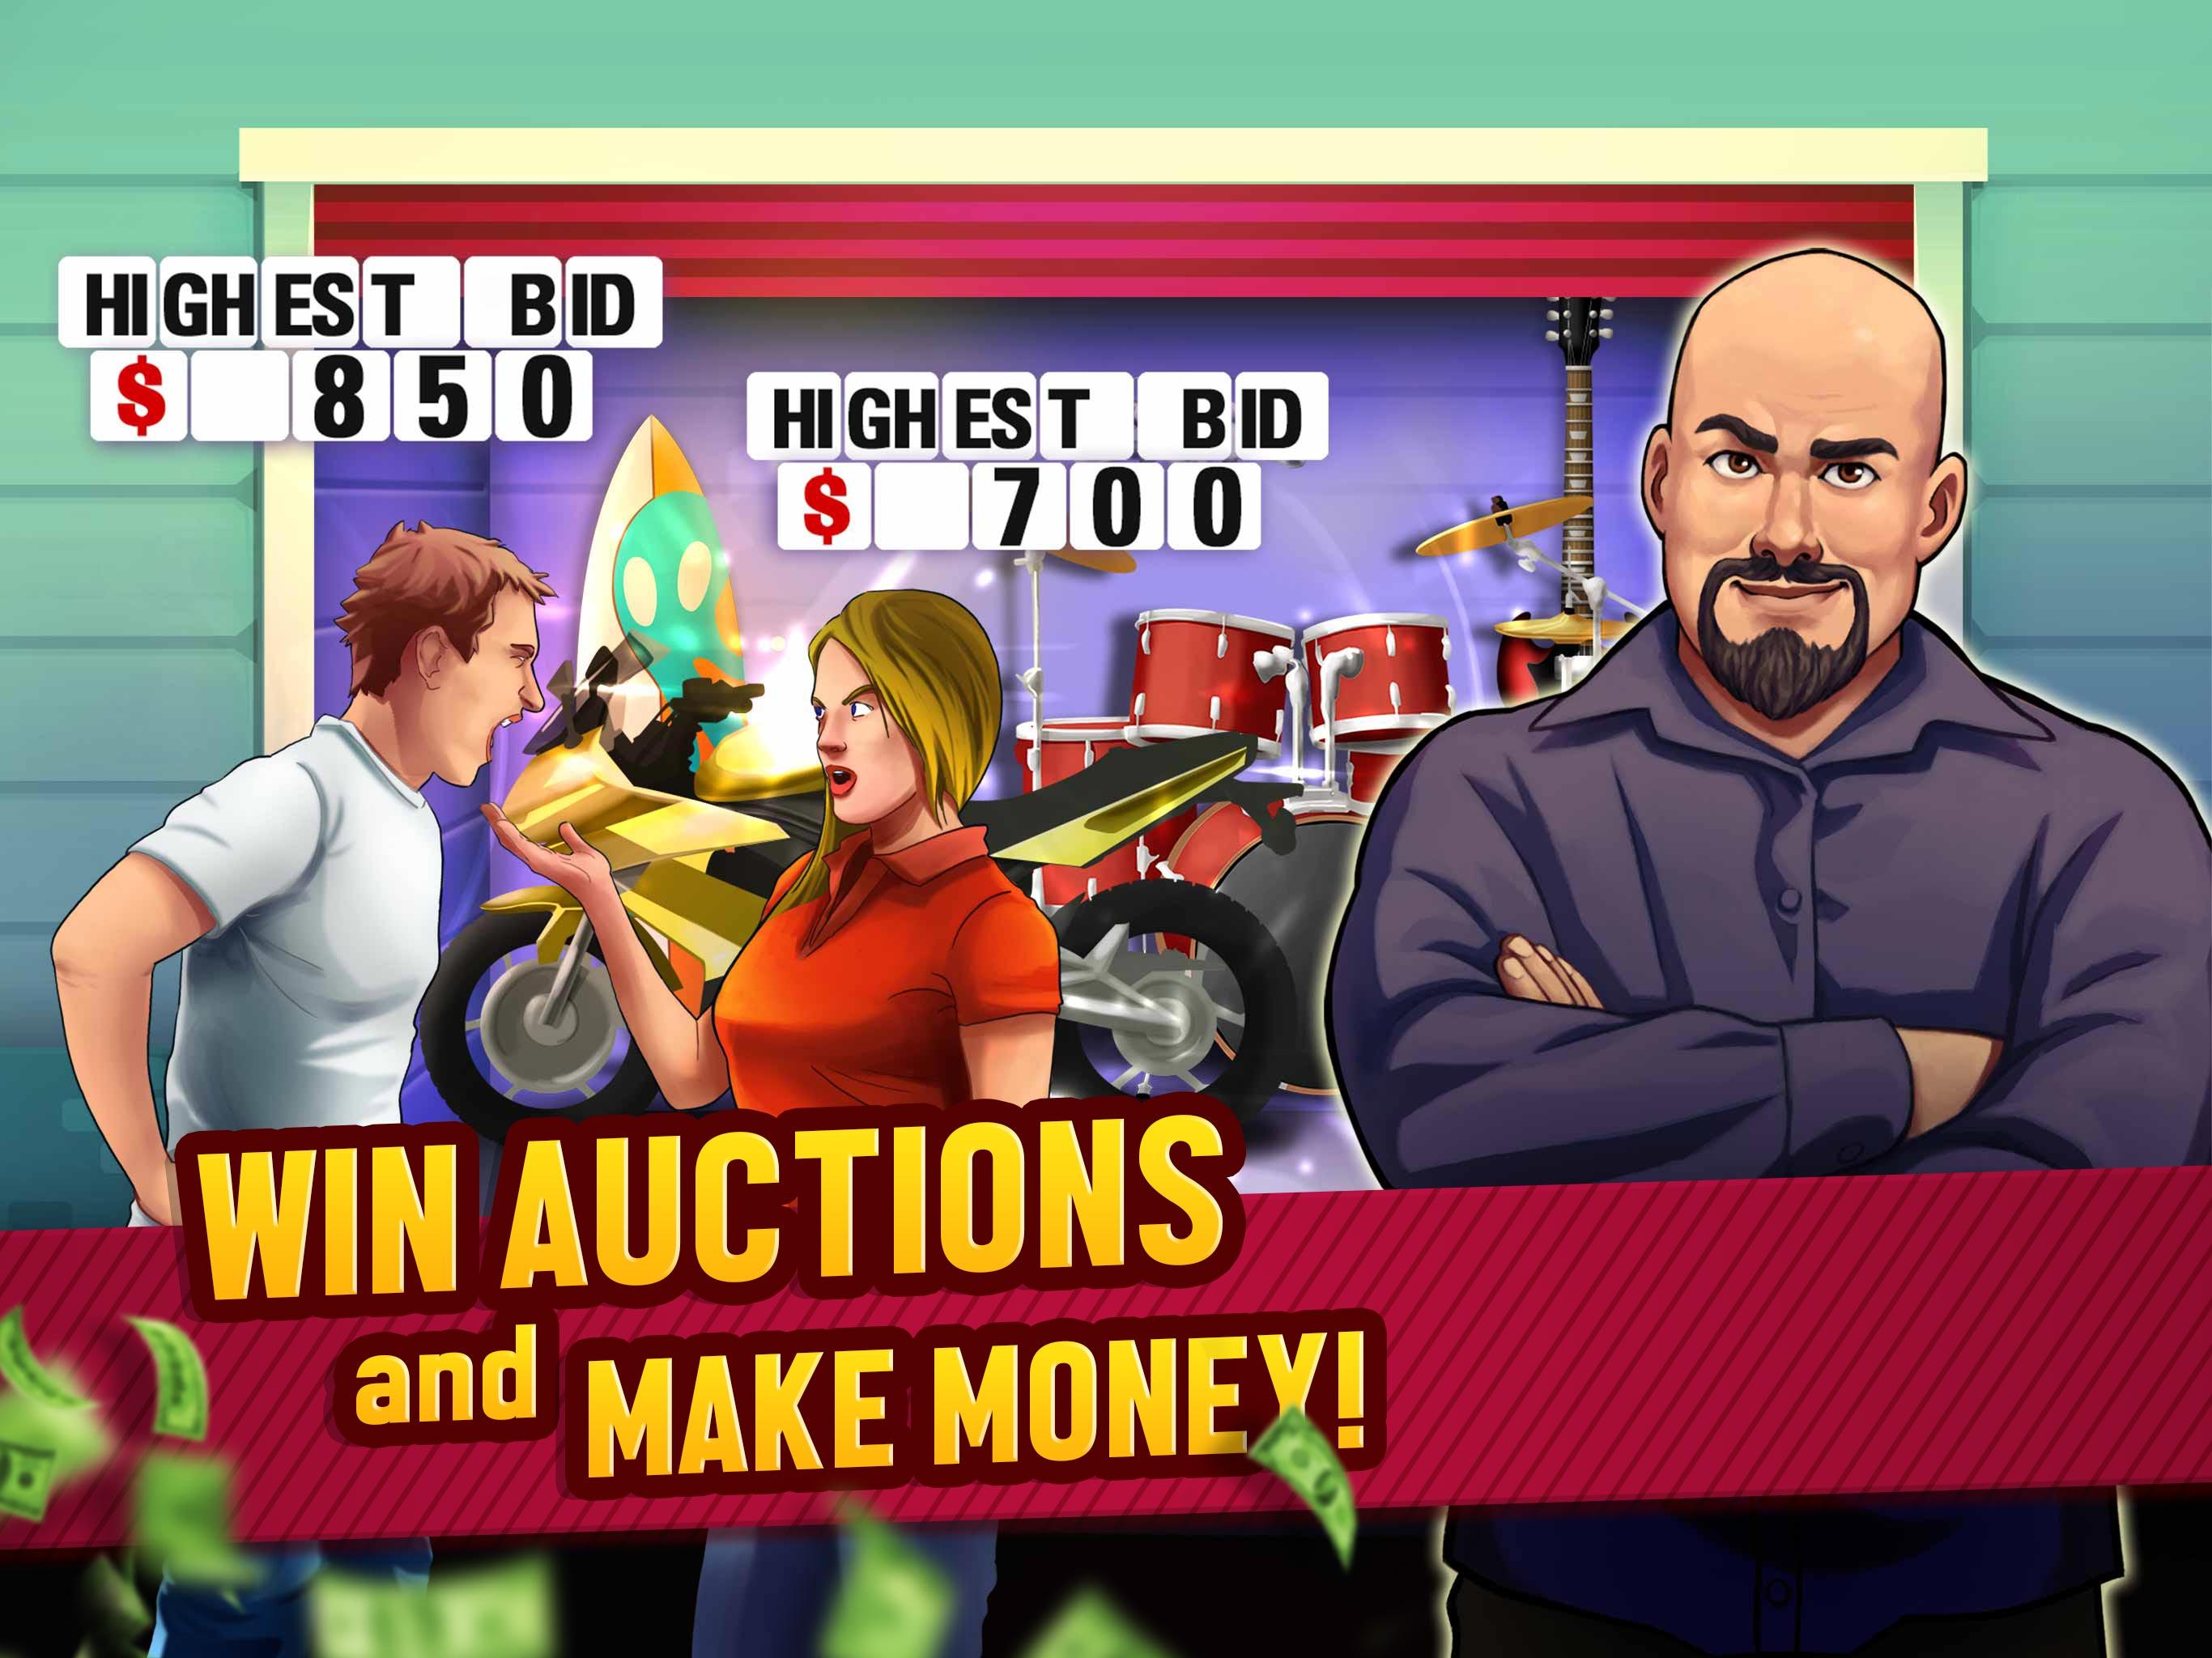 Bid Wars for Android - APK Download - 